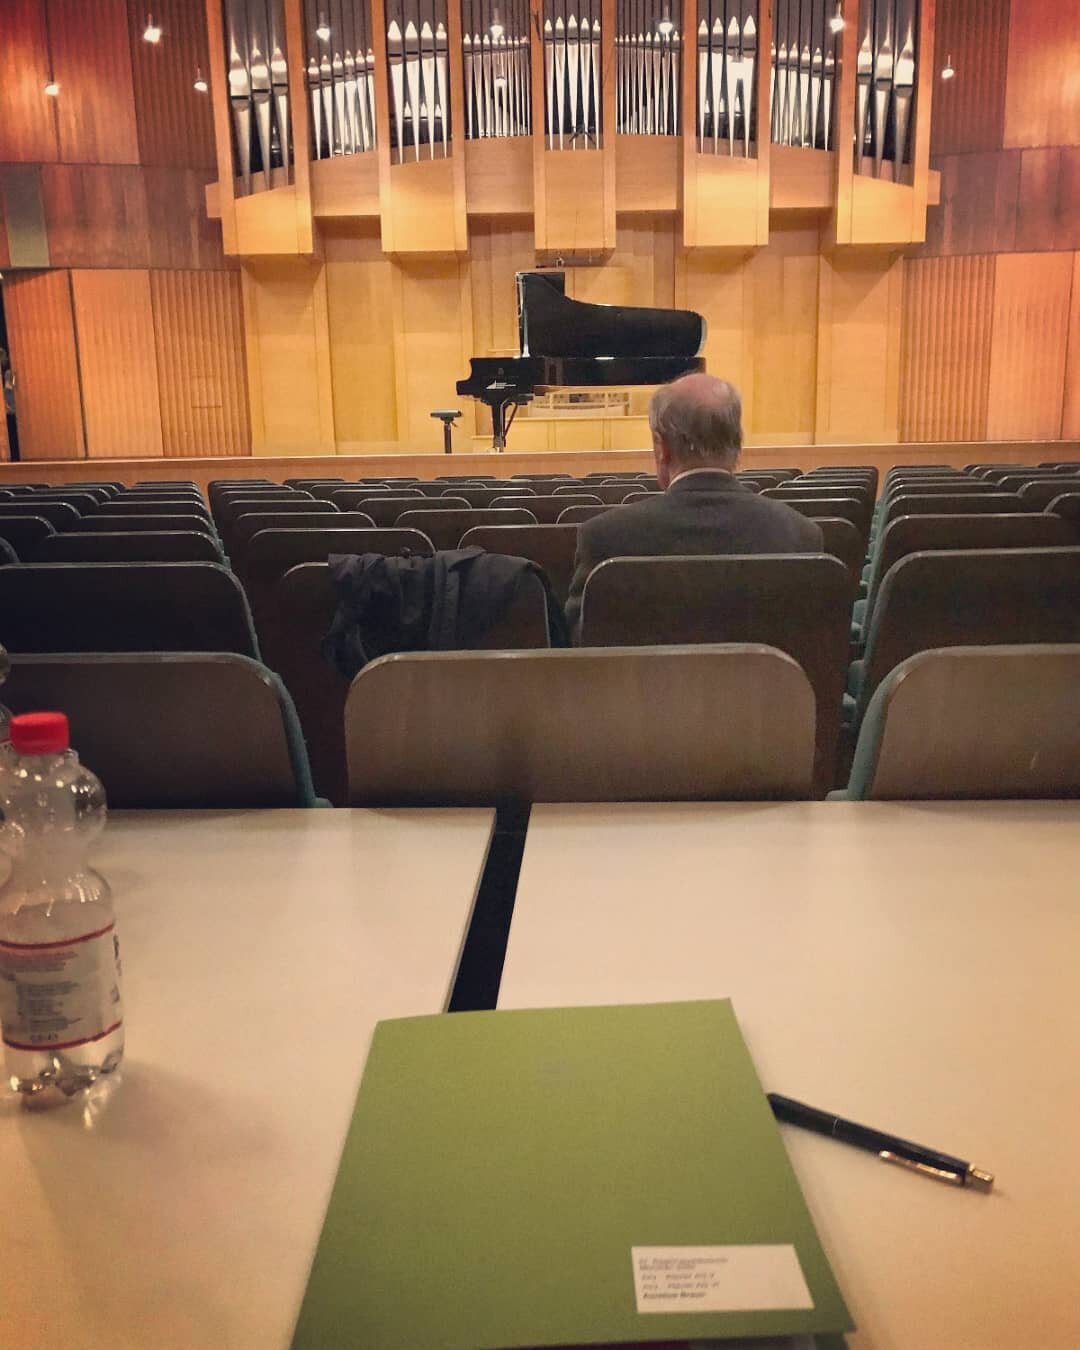 Very excited to be part of the jury of this year's Jugend Musiziert in Munich. Congratulations to all the participants!
.
.
.
.
.
#competition #piano #jugendmusiziert #jury #pianist #klavier #munich #wettbewerb #bravo #pianocompetition #youngtalents